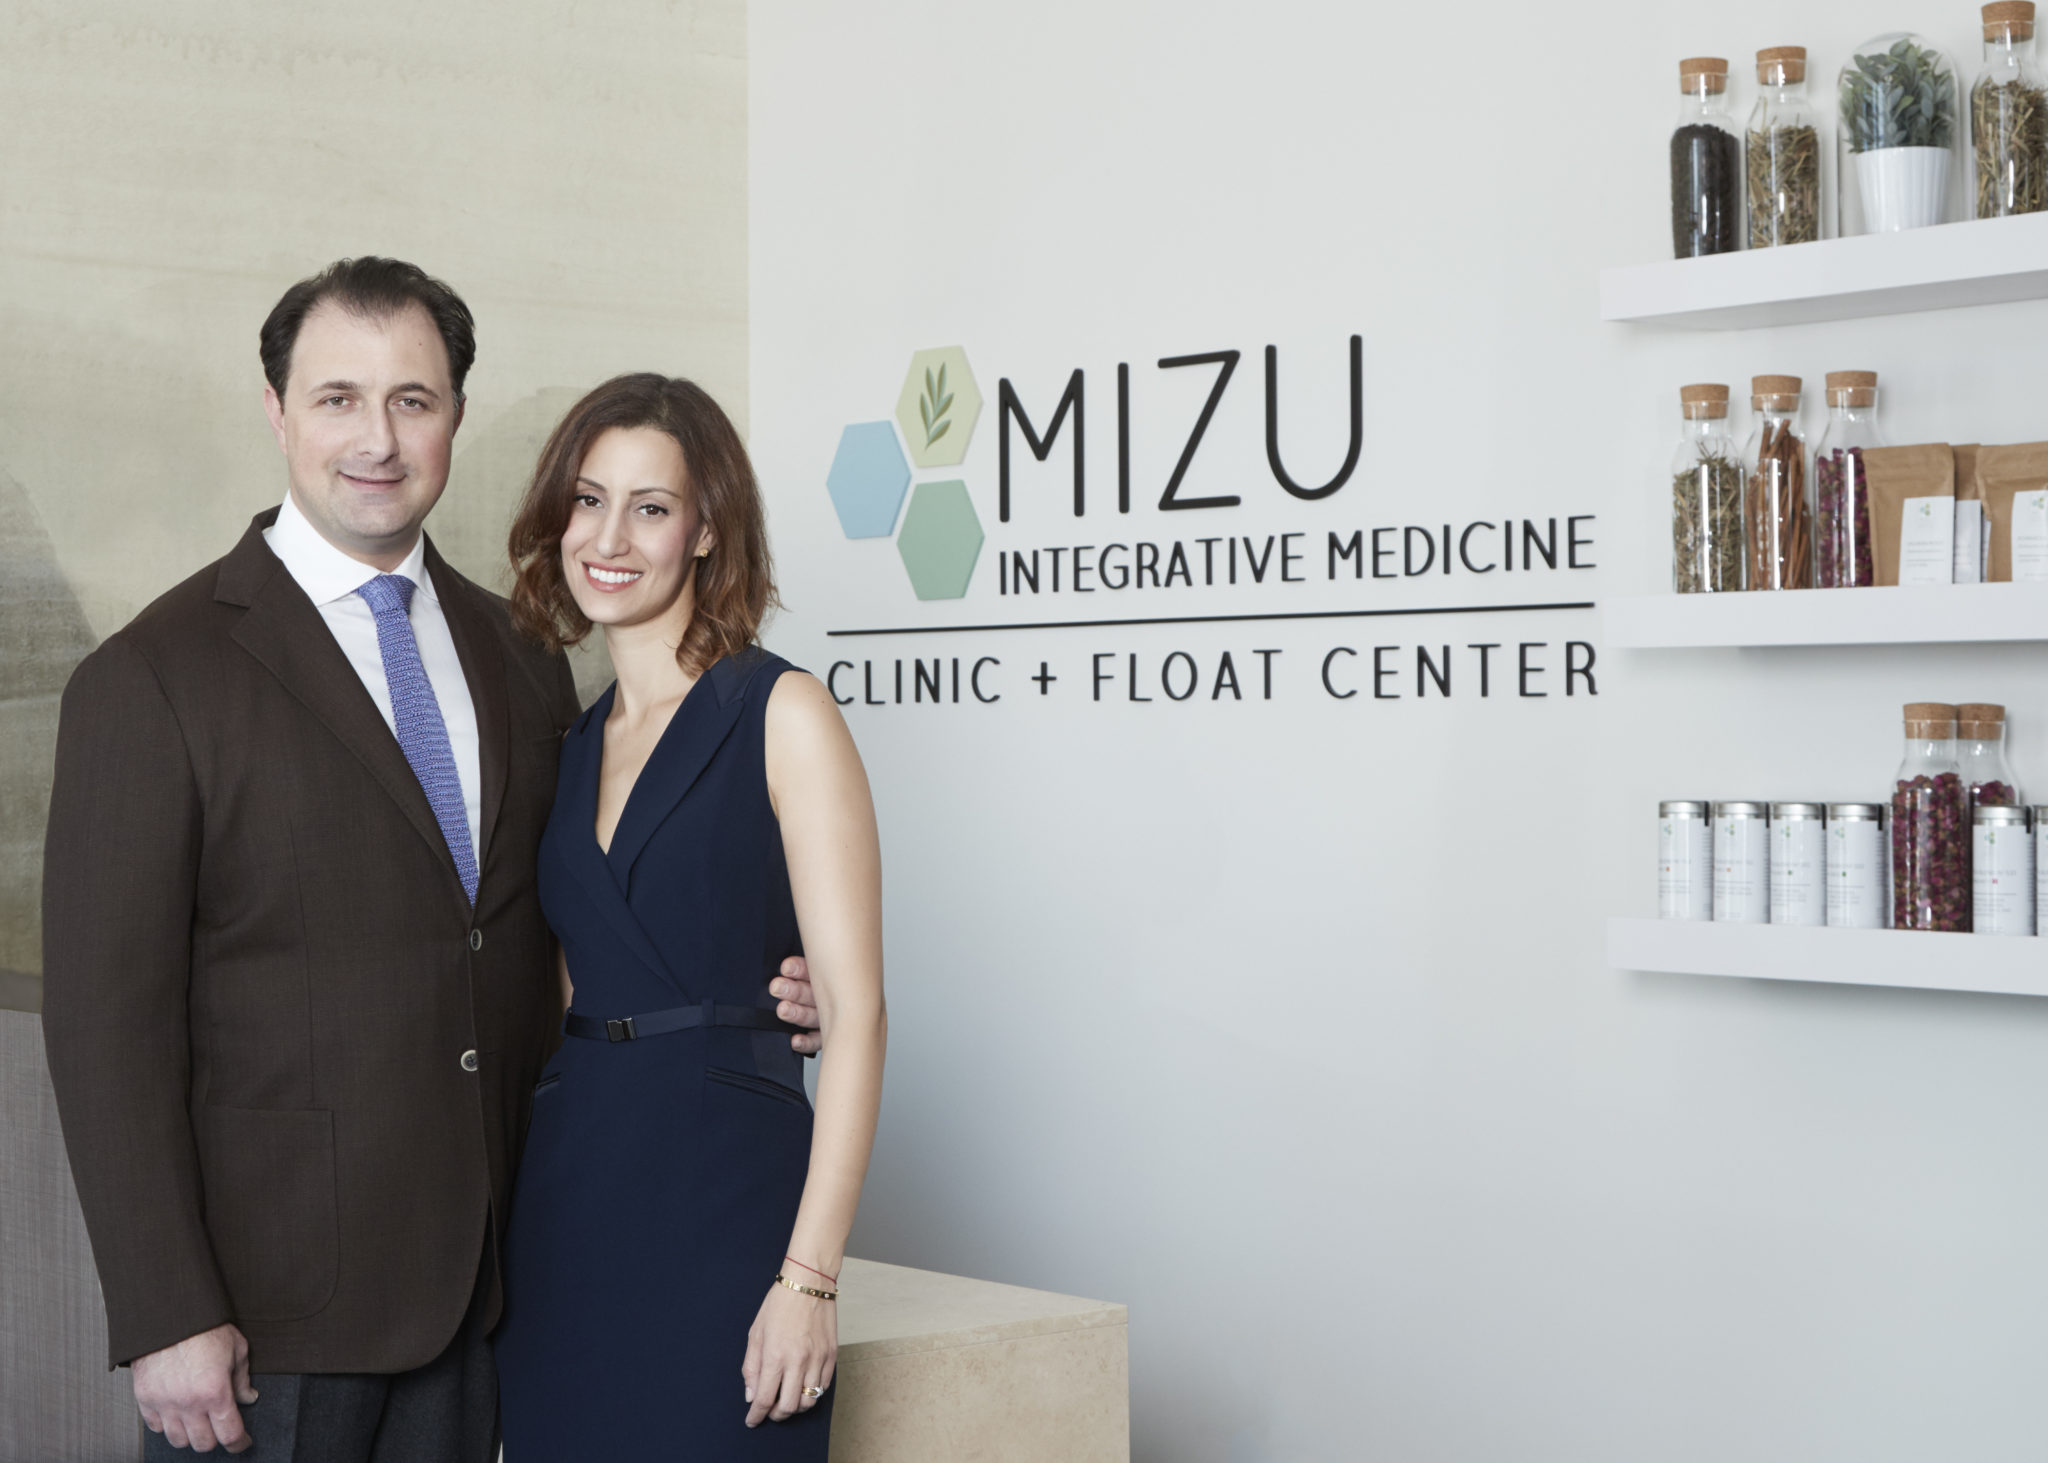 Relax and Recover Like Pro Athlete’s at MIZU Clinic + Float Center